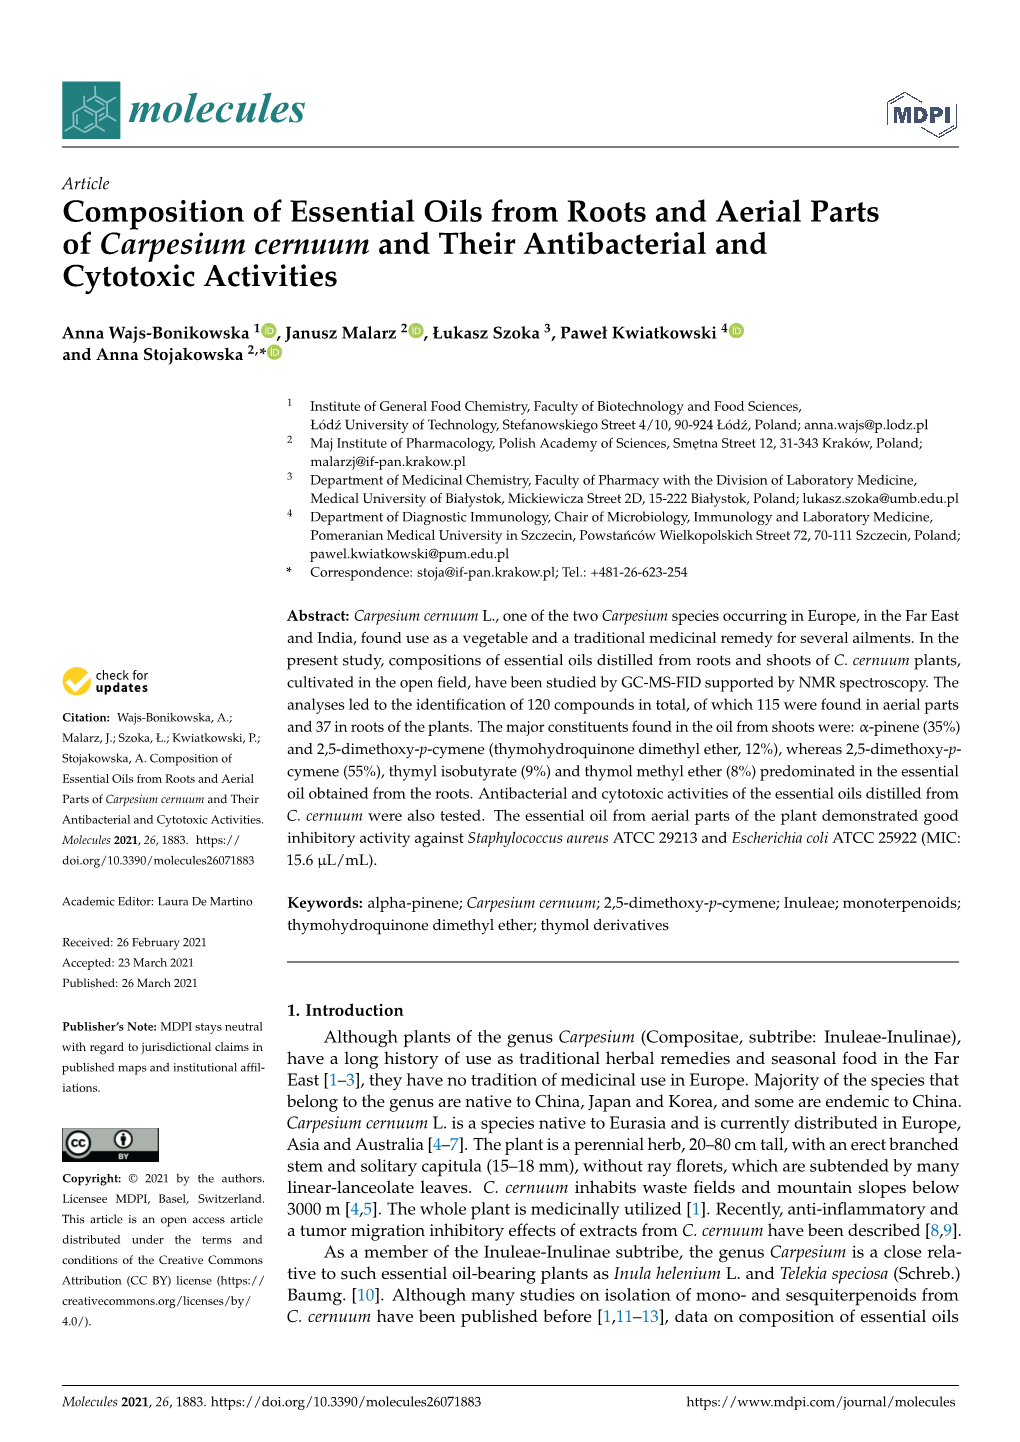 Composition of Essential Oils from Roots and Aerial Parts of Carpesium Cernuum and Their Antibacterial and Cytotoxic Activities